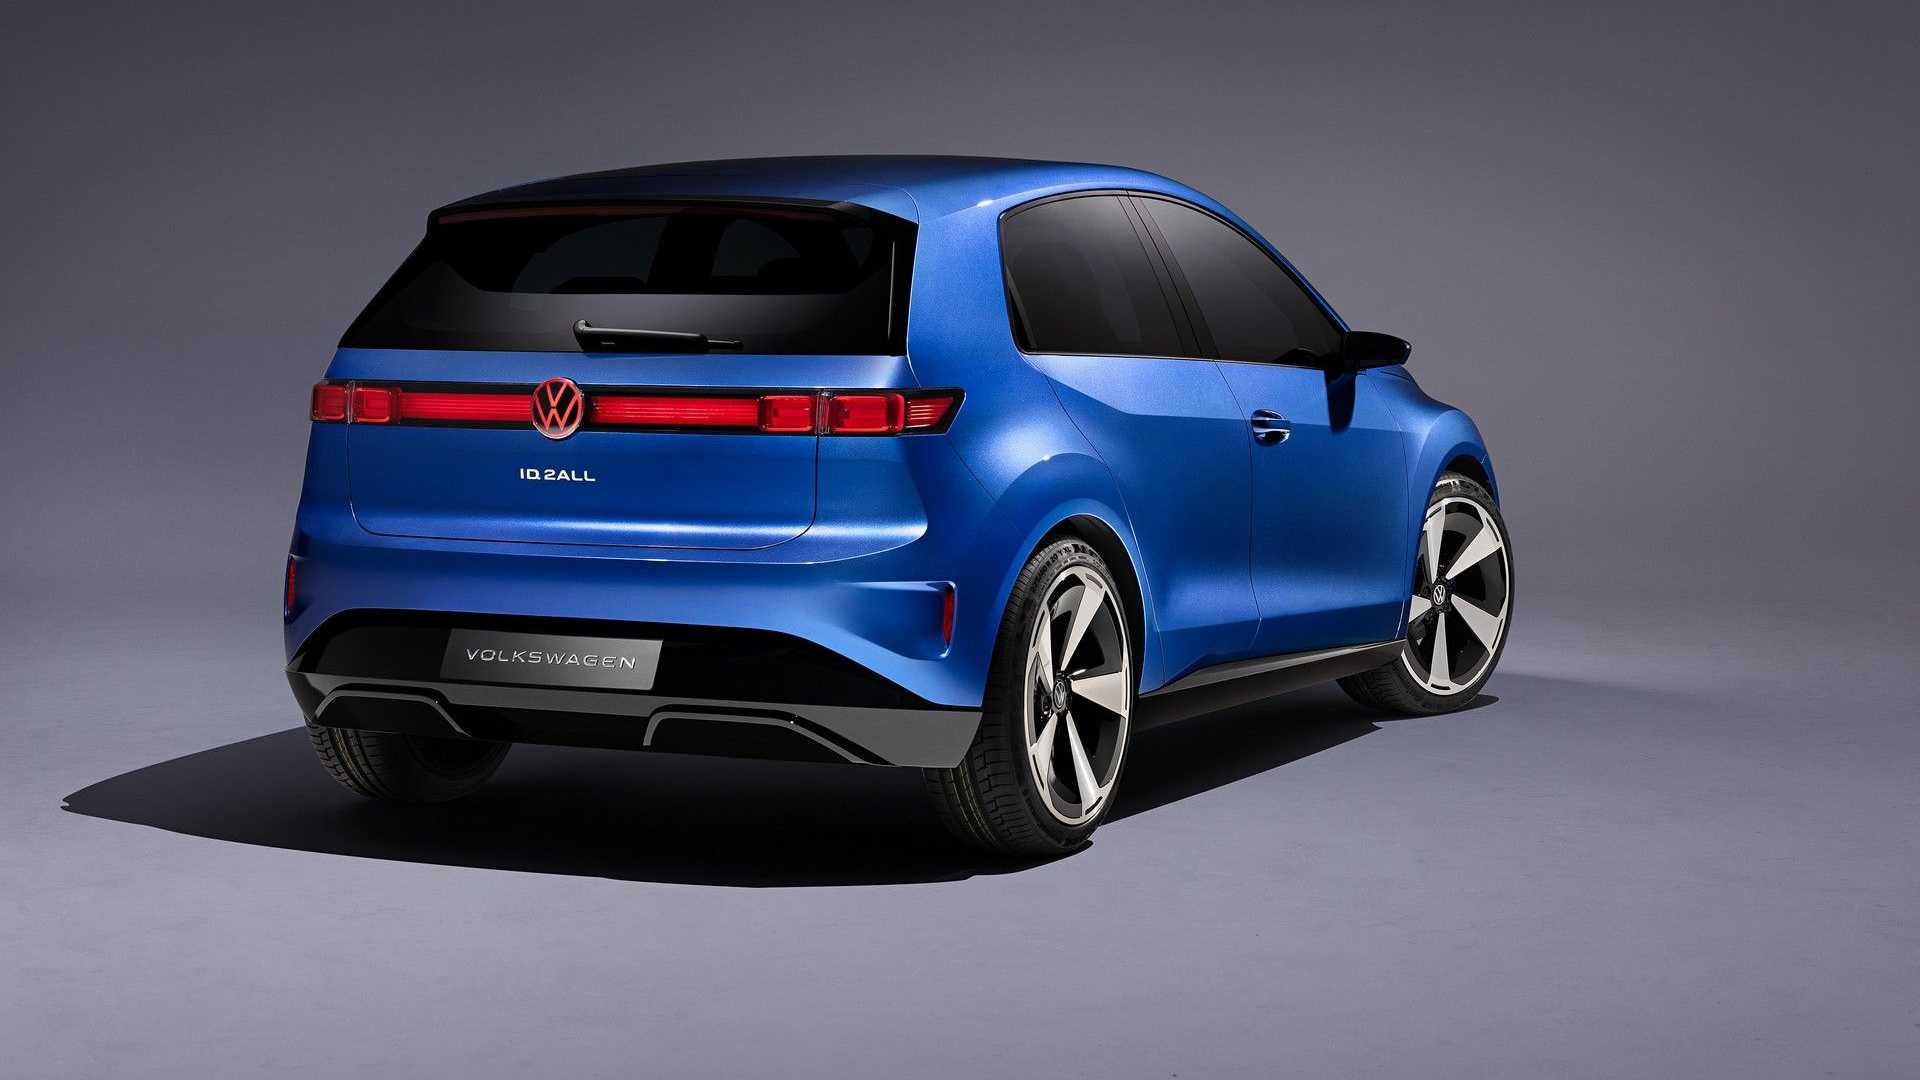 VW Design Boss Andreas Mindt Claims Smaller Cars More Difficult to Design Than Hypercars